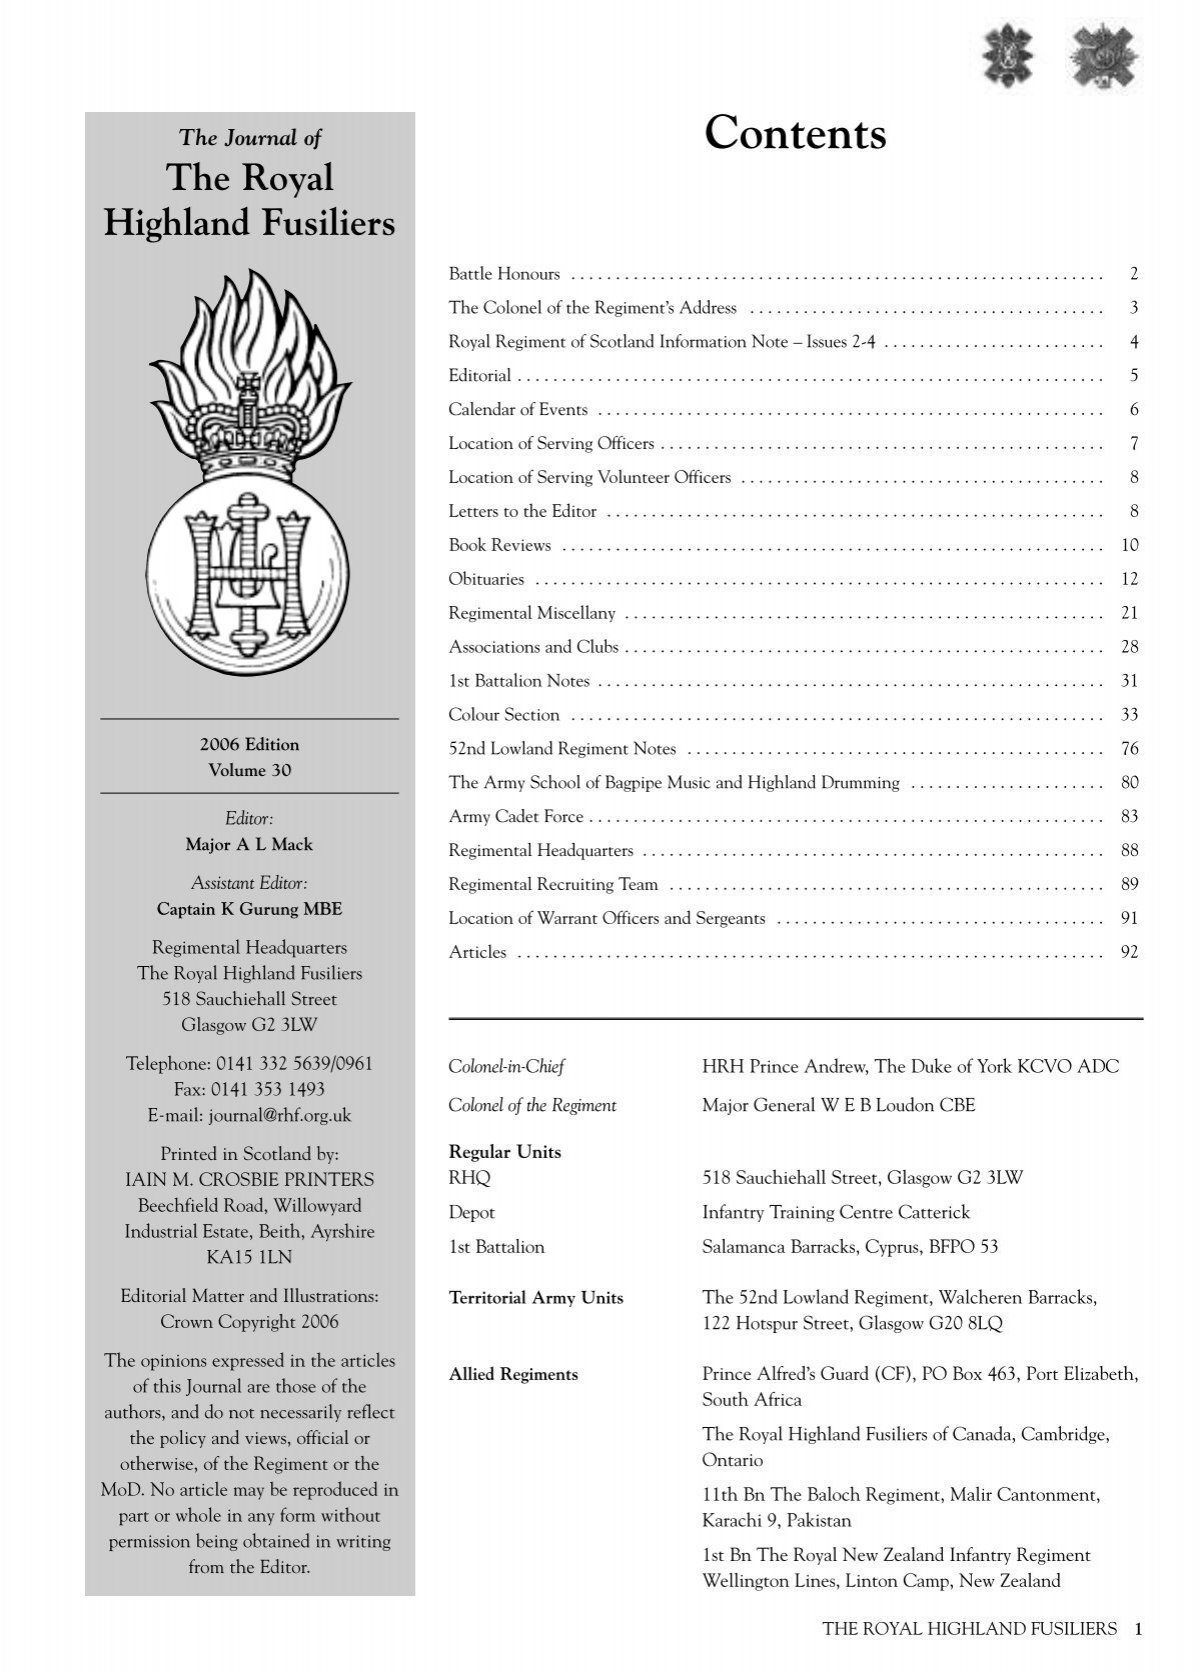 2006 Journal.pdf - The Royal Highland Fusiliers